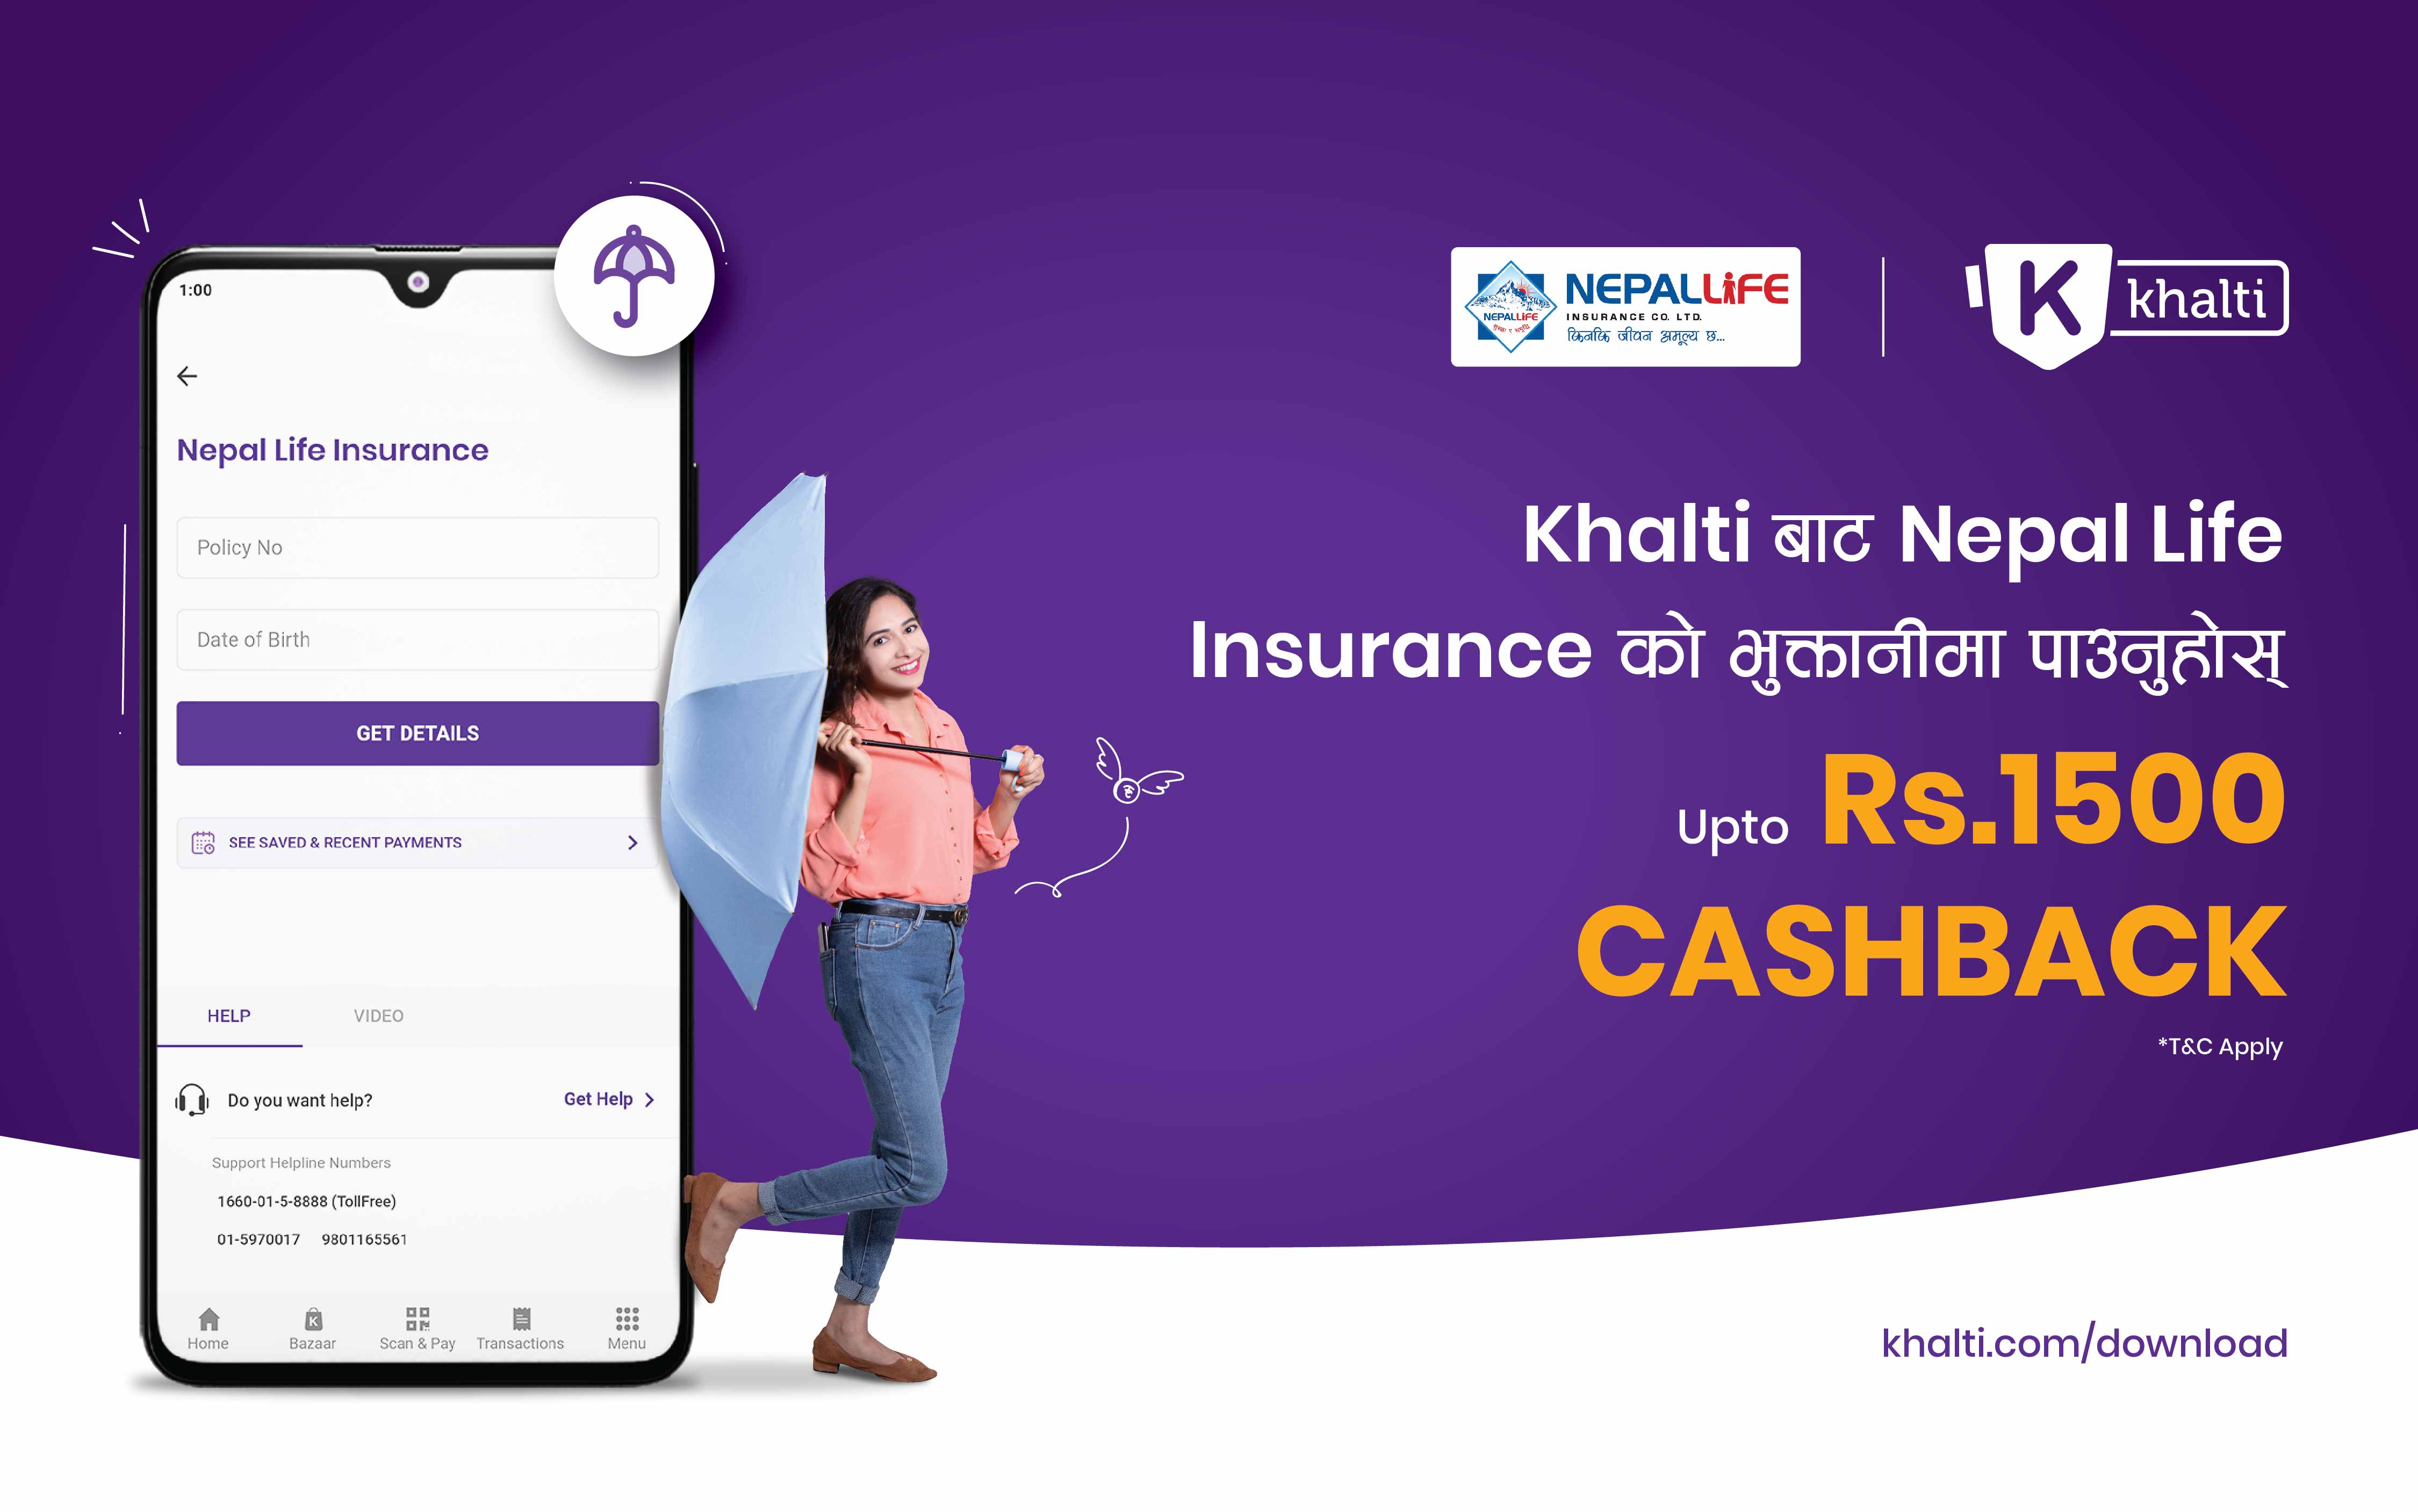 Make your Nepal Life Insurance premium payment online with Khalti: Get upto Rs. 1,500 cashback